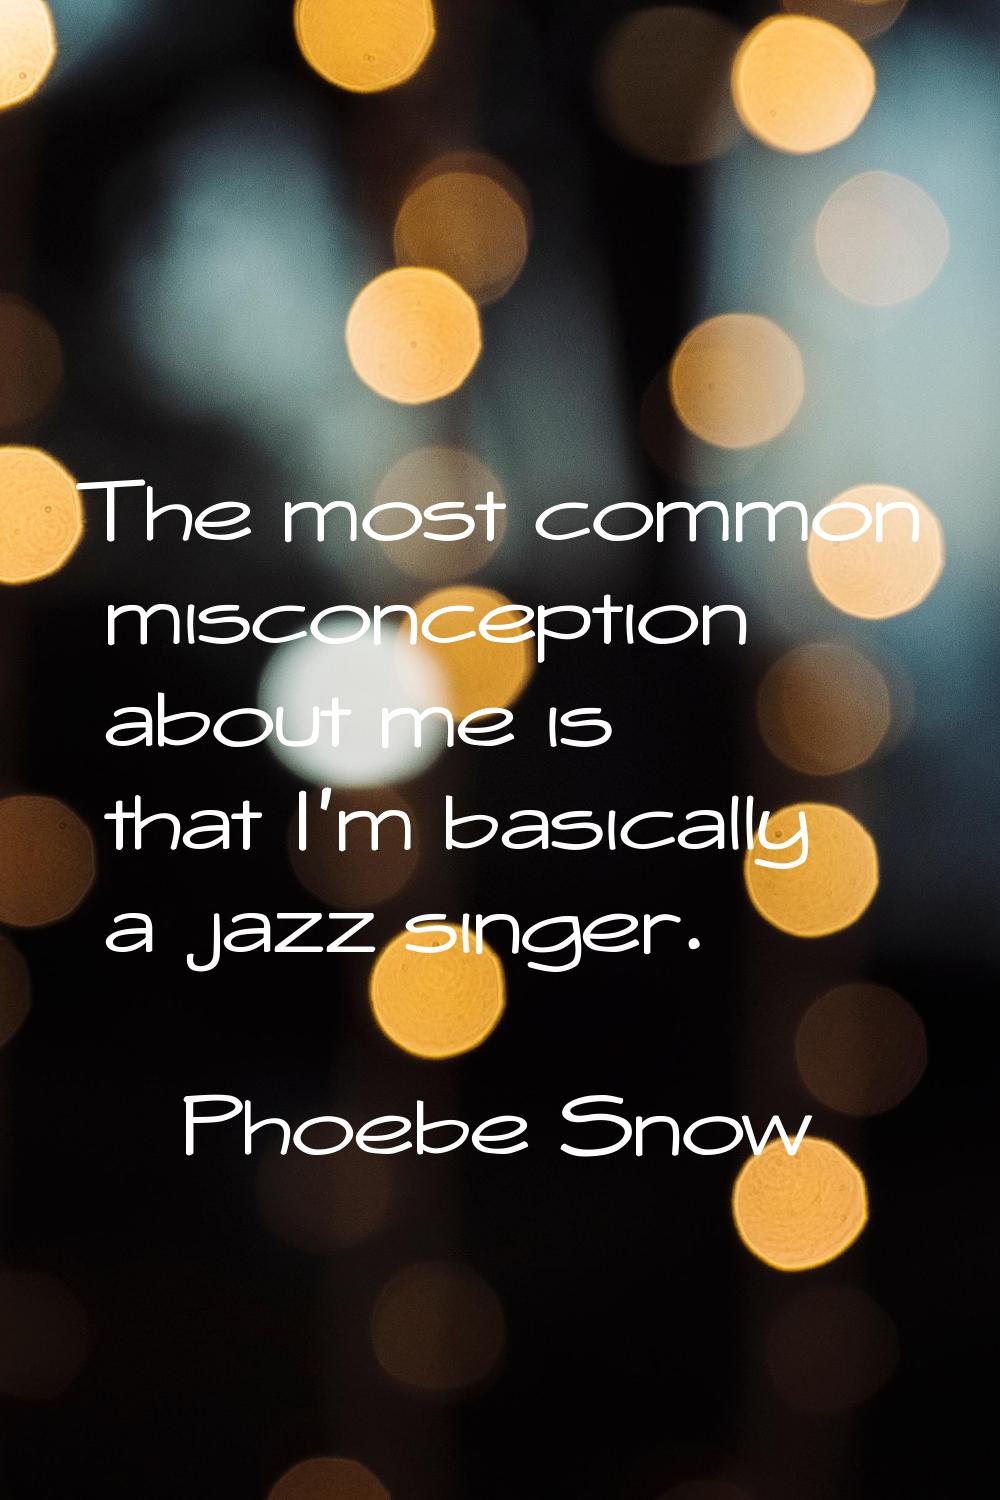 The most common misconception about me is that I'm basically a jazz singer.